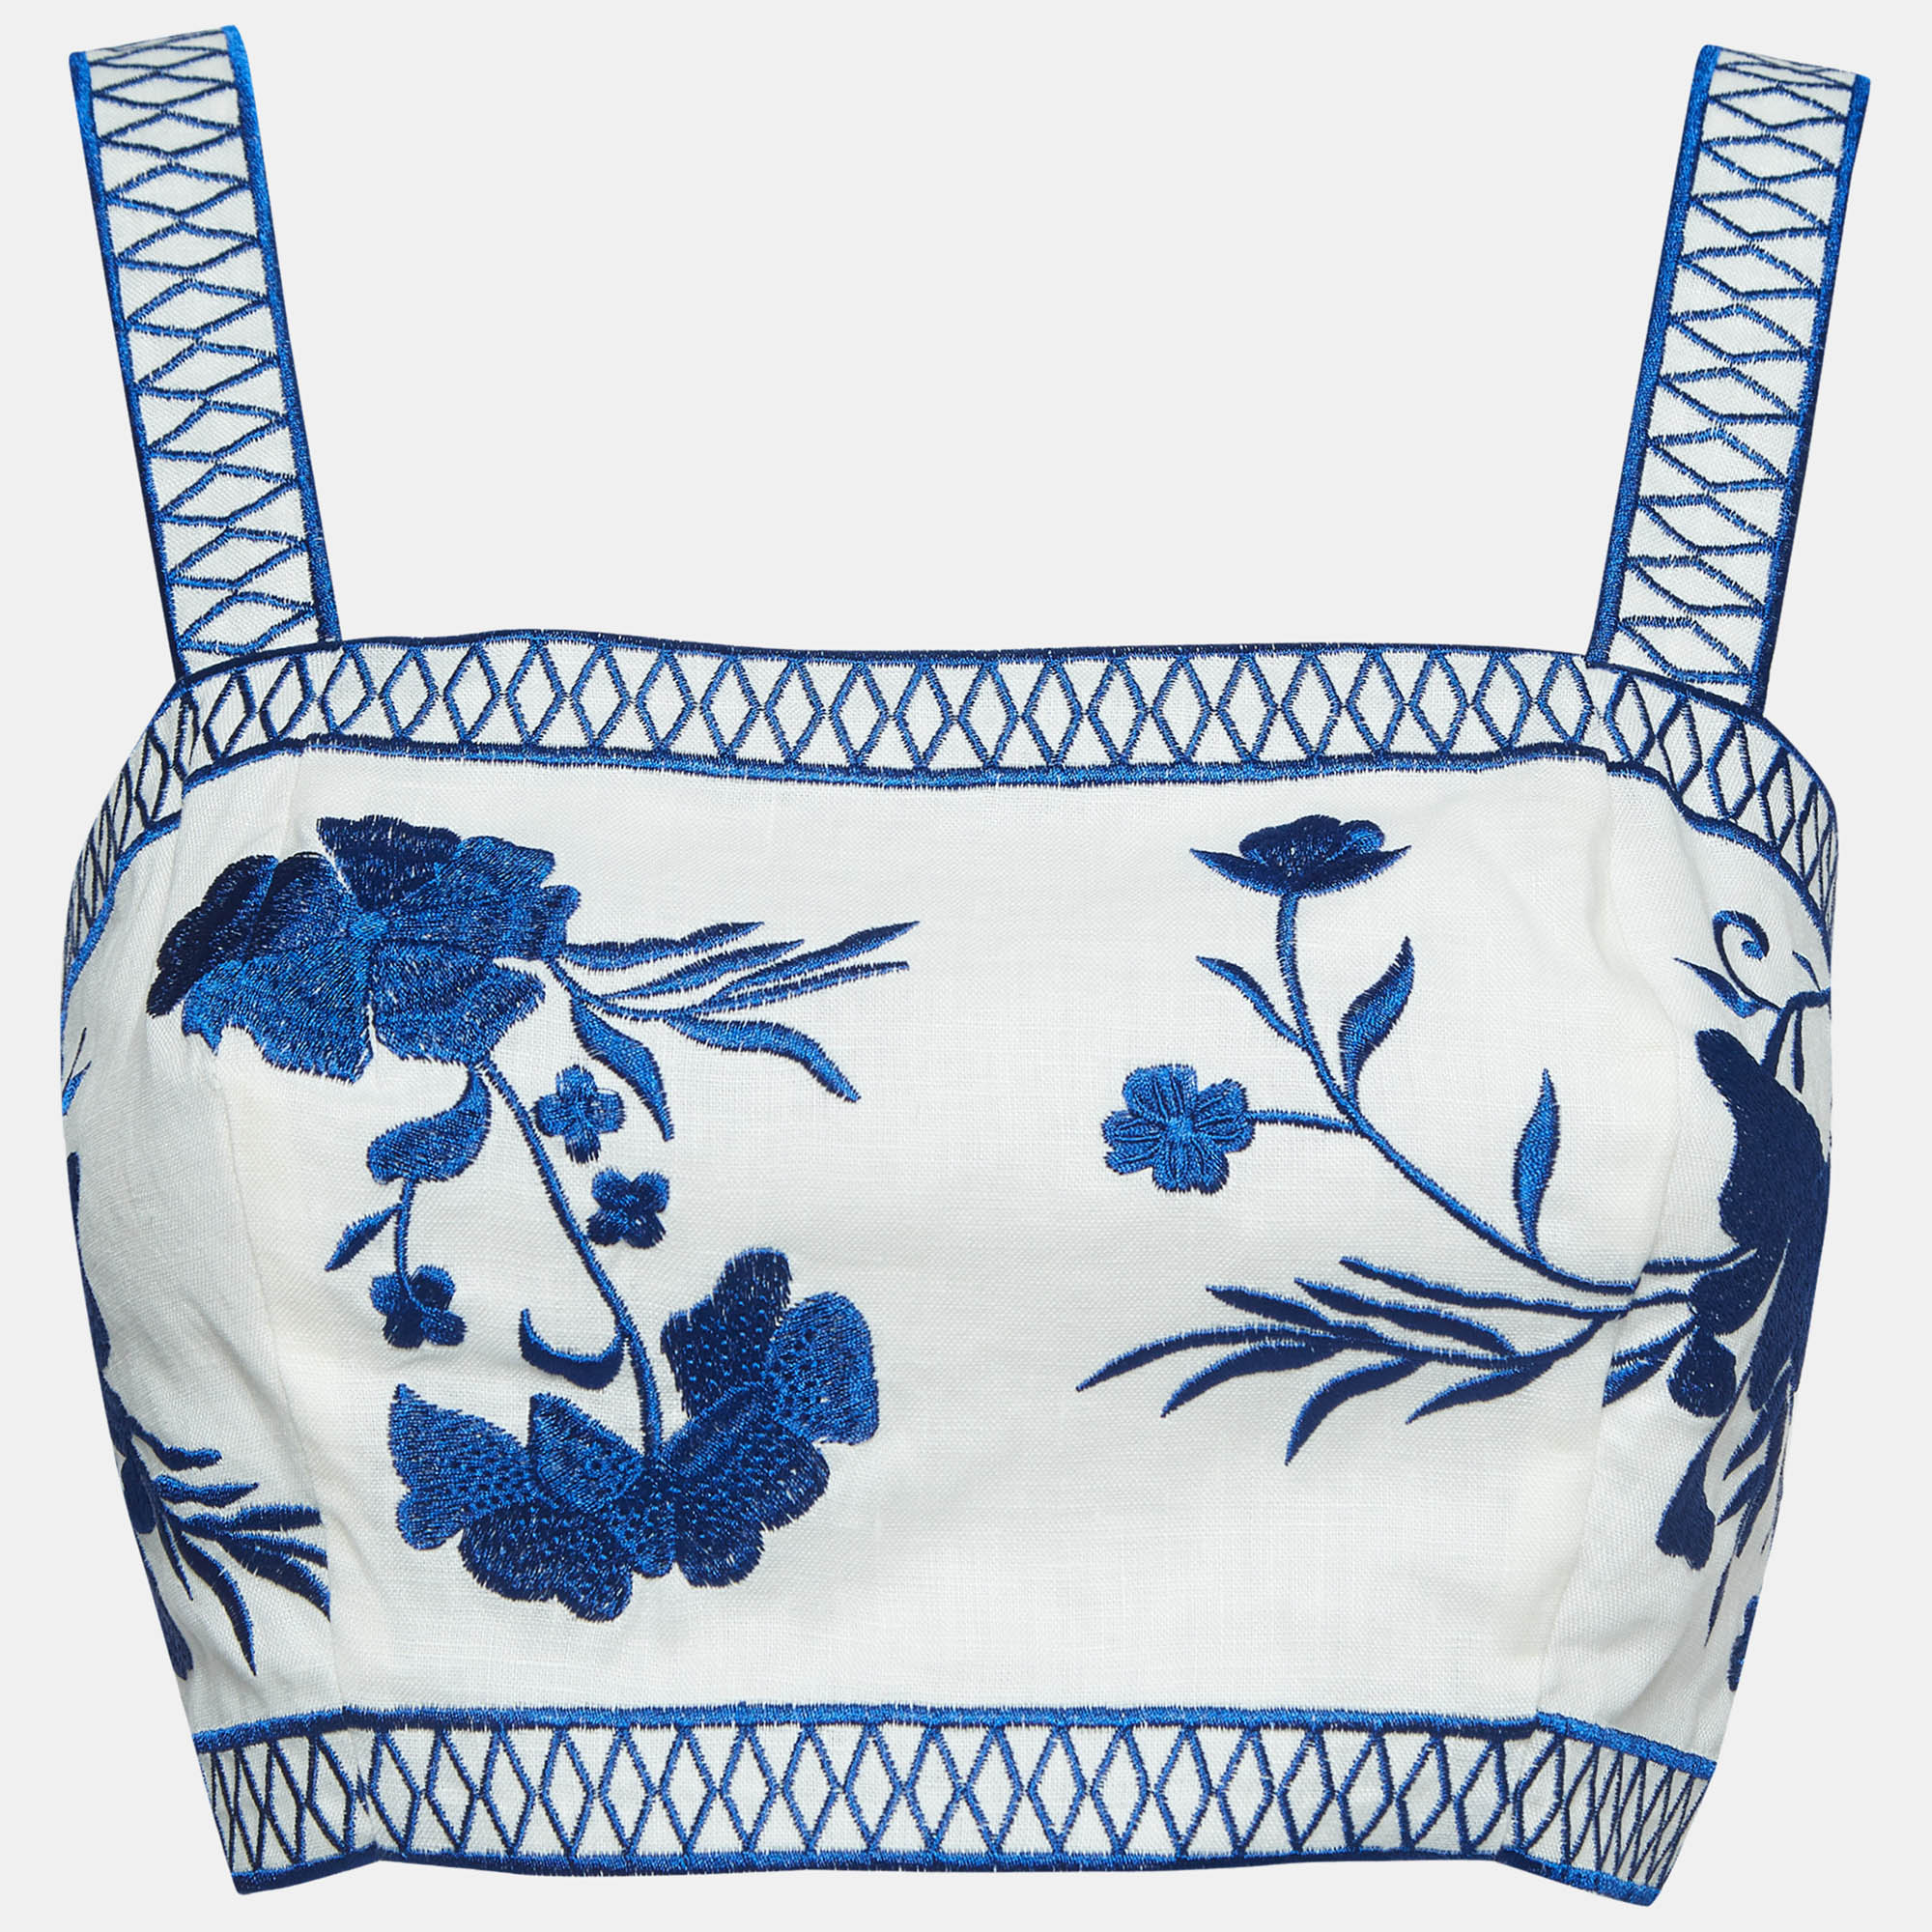 Alexis white/blue embroidered linen crop top s